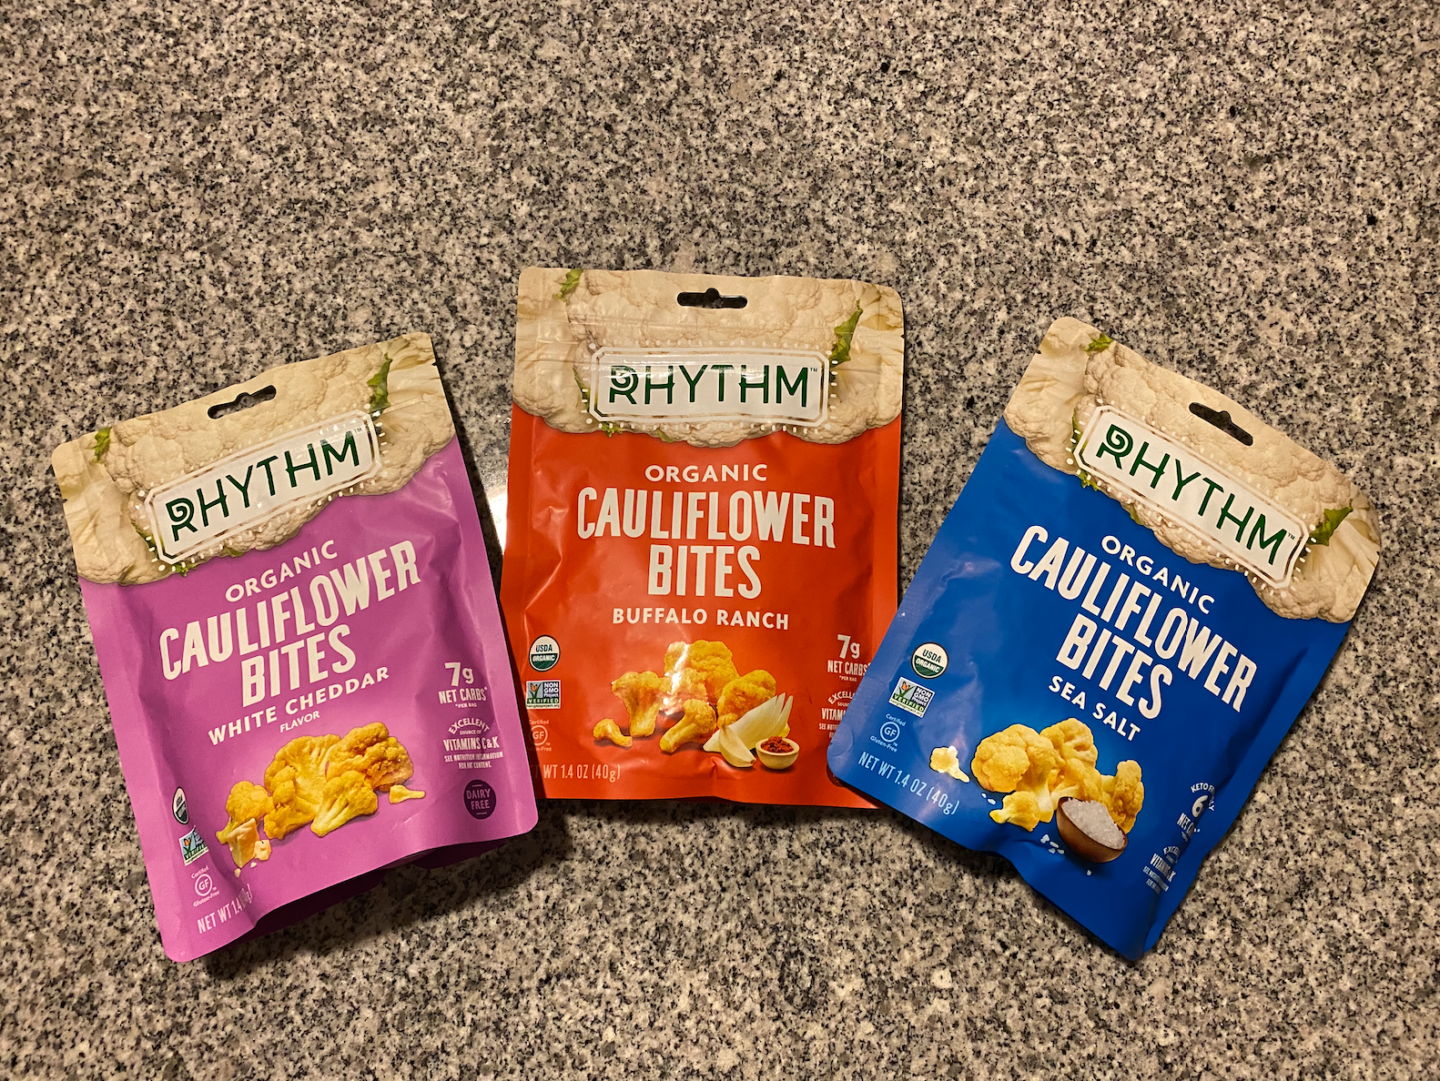 I Feel in Love with Cauliflower Bites by Rhythm Superfoods!